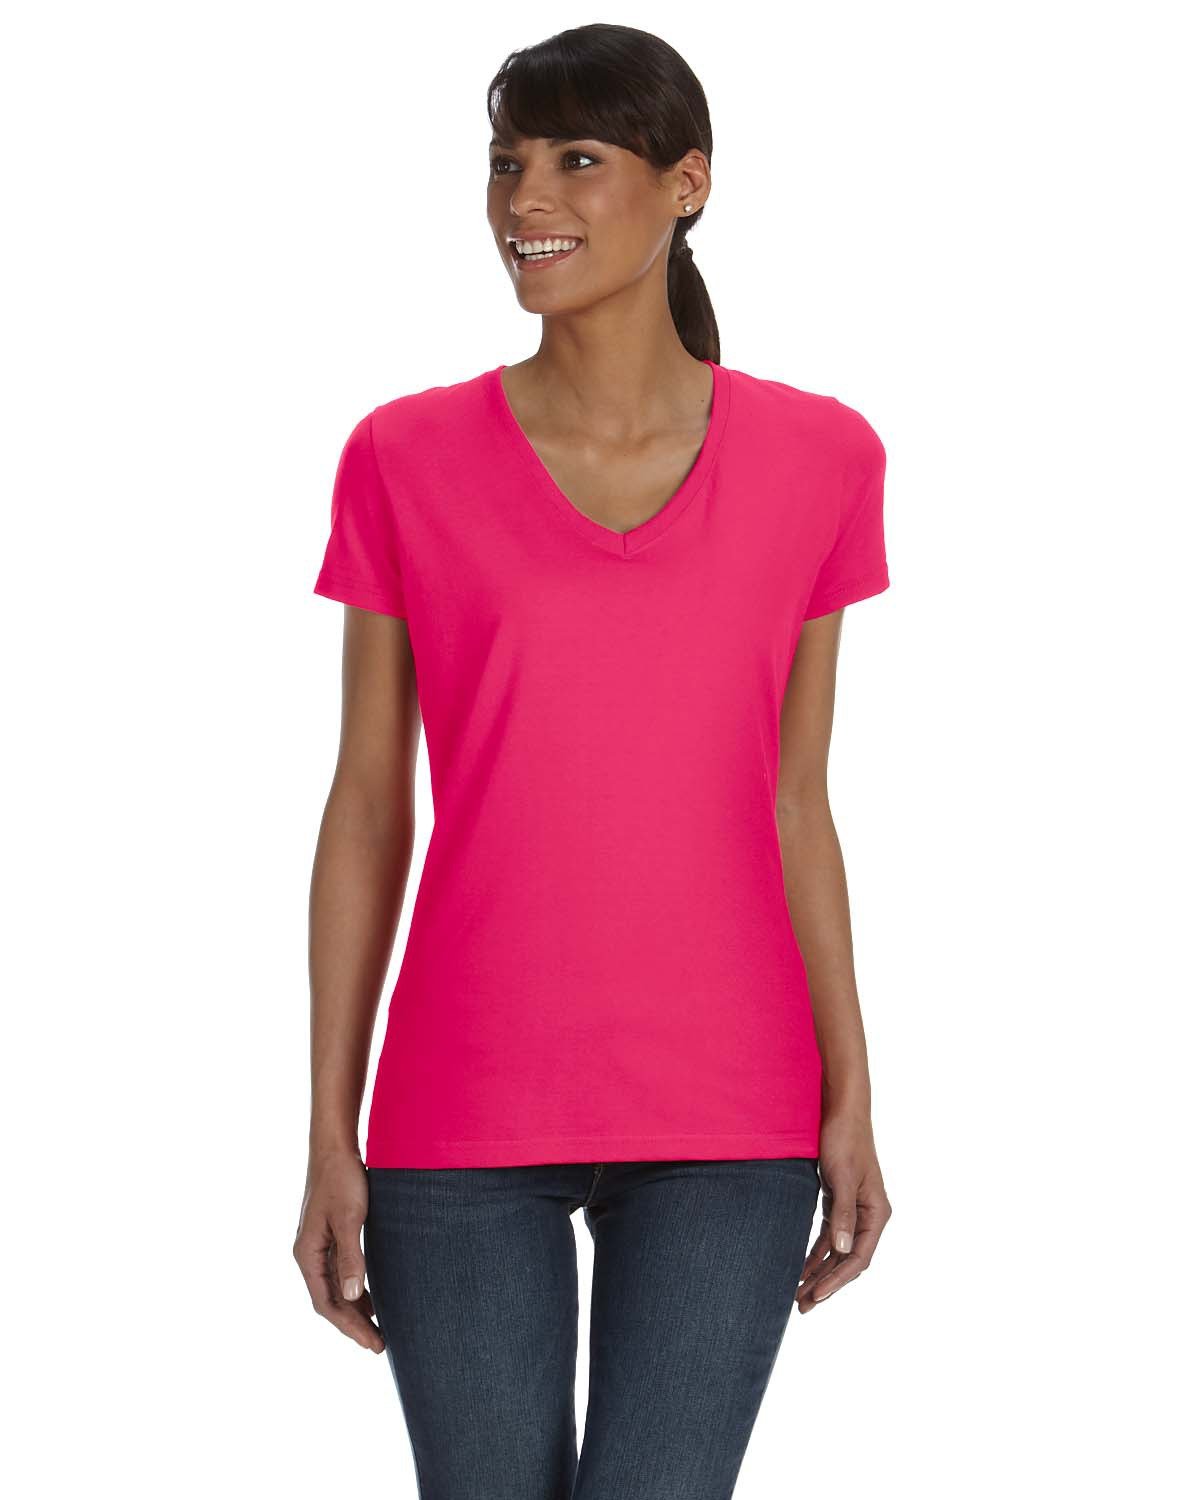 Fruit of the Loom Ladies' HD Cotton™ V-Neck T-Shirt CYBER PINK 